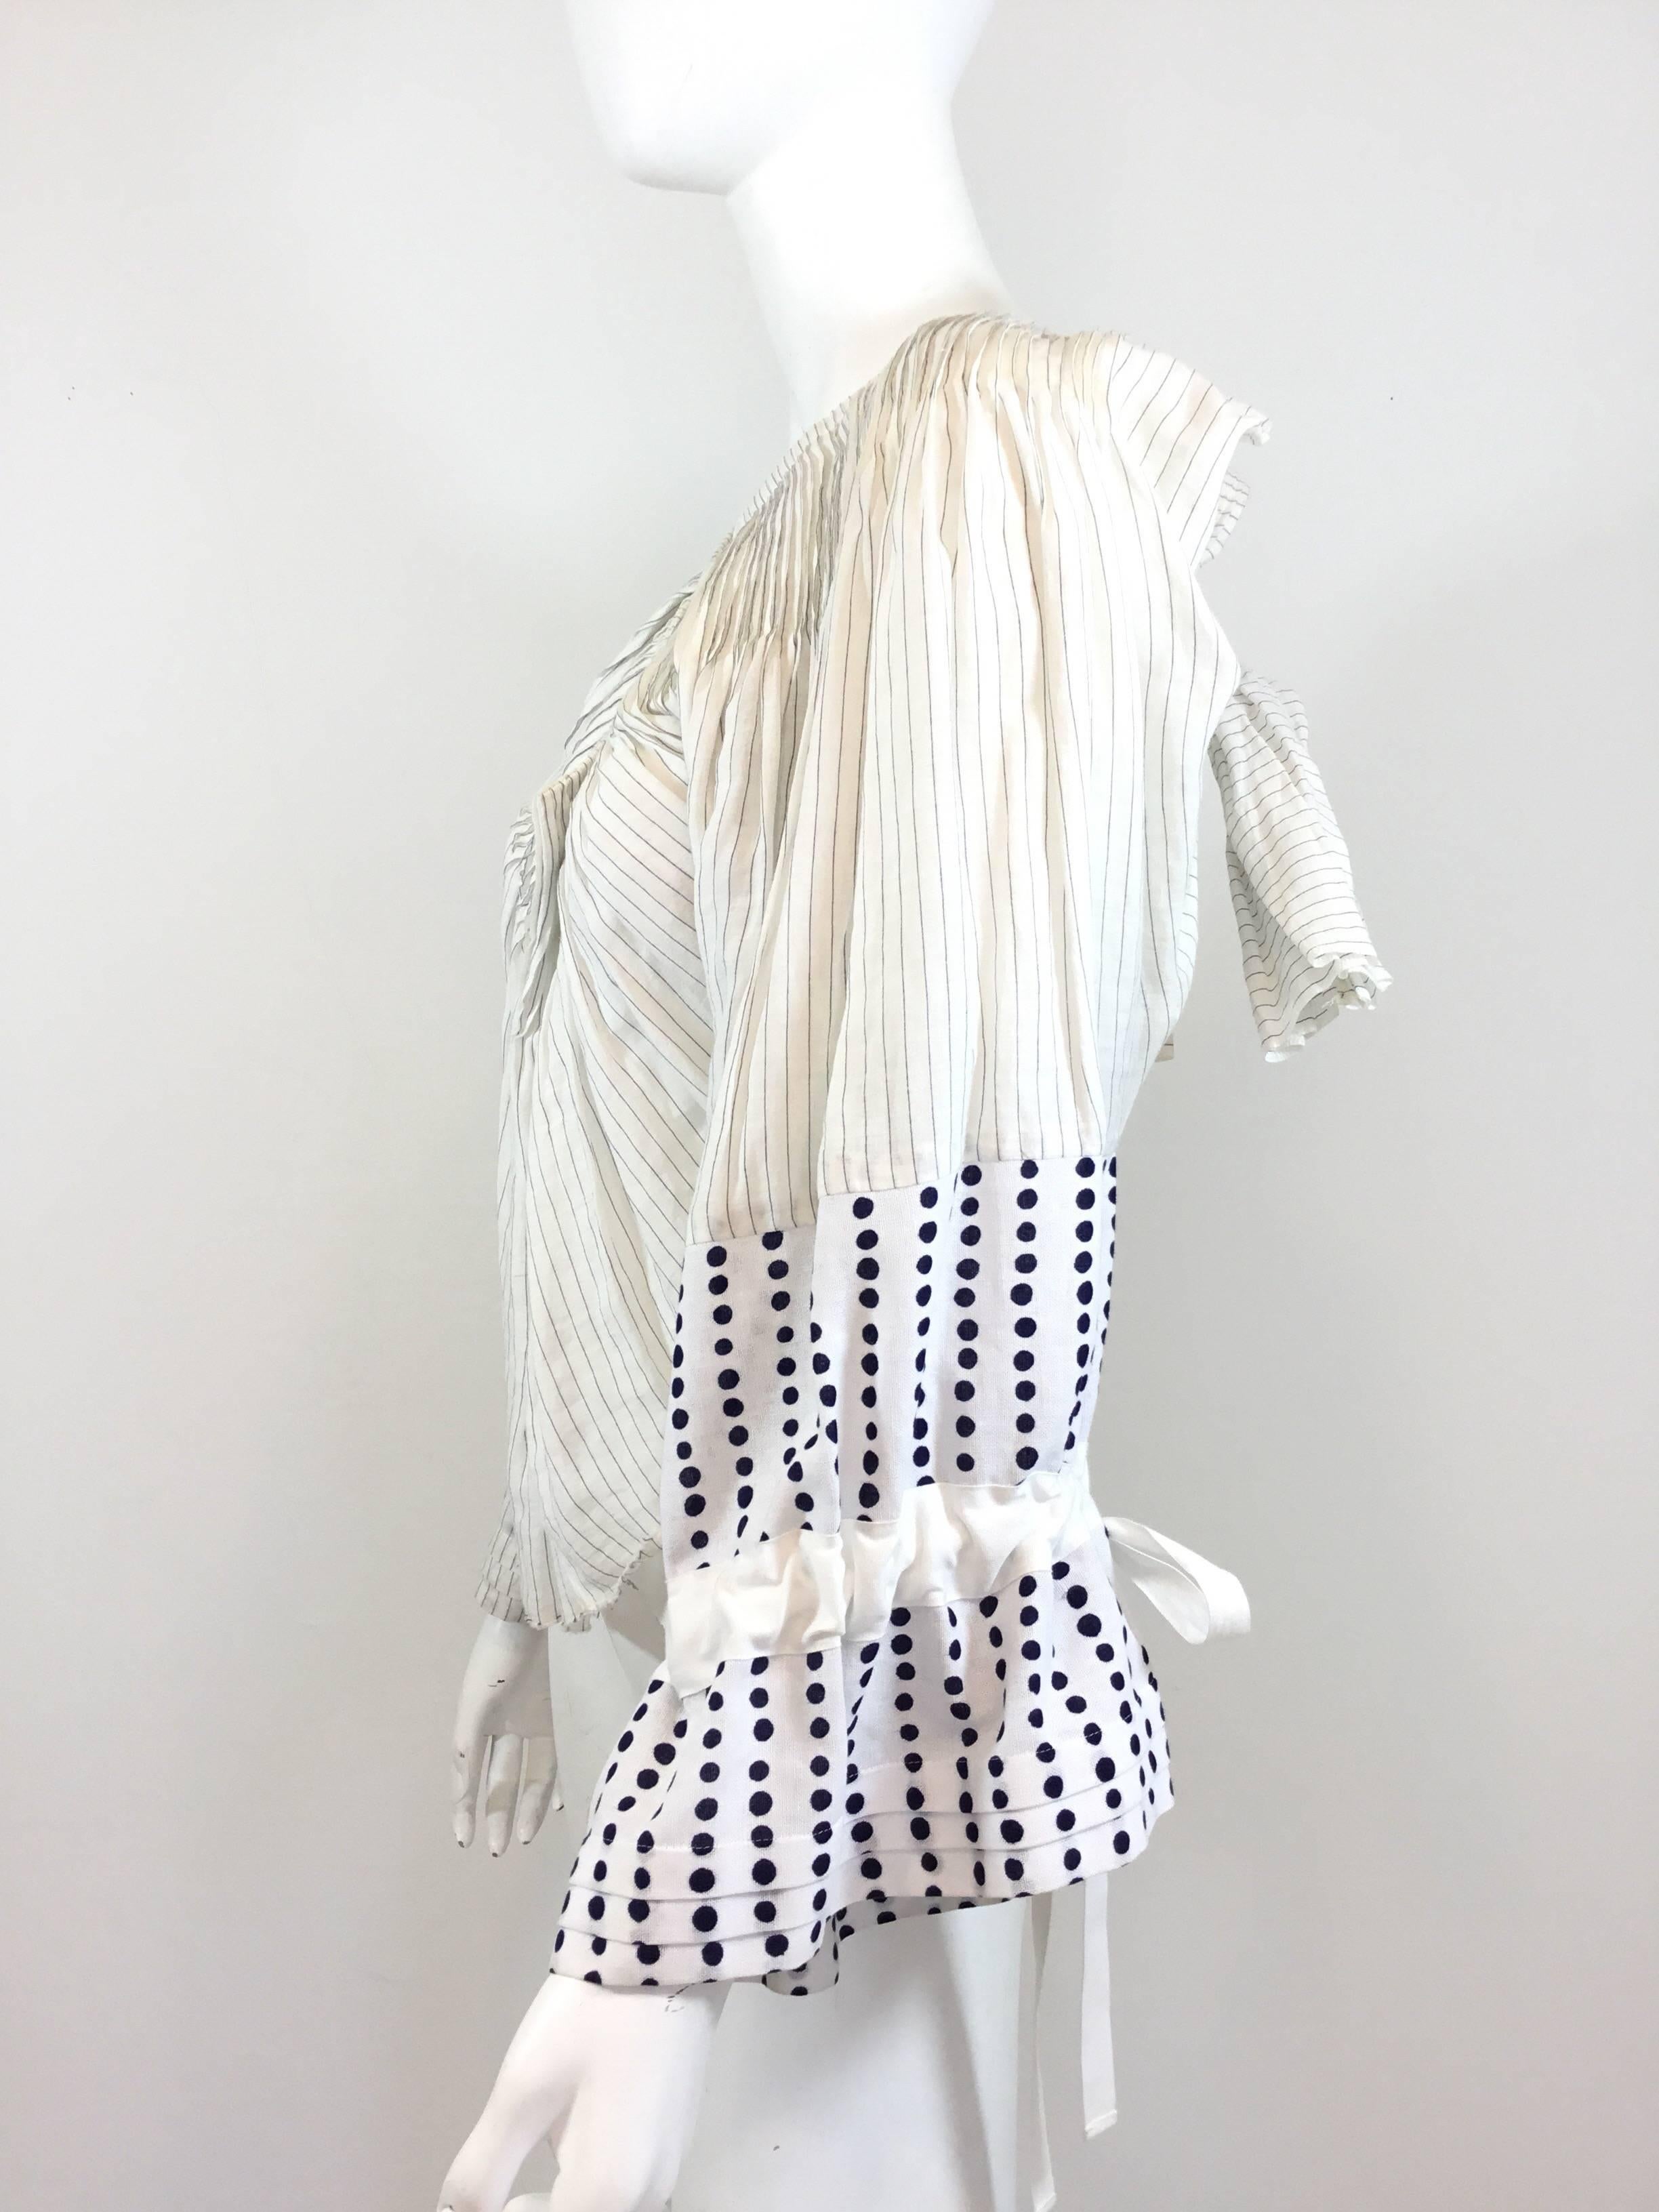 Tao Kurihara Comme des Garçons Blouse 2007

Cotton shirting material peasant blouse with striped and polka dot patterns in blue and white lightweight shirt fabric. Pleating throughout, unfinished hem, peasant sleeves with drawstring wrist ties.